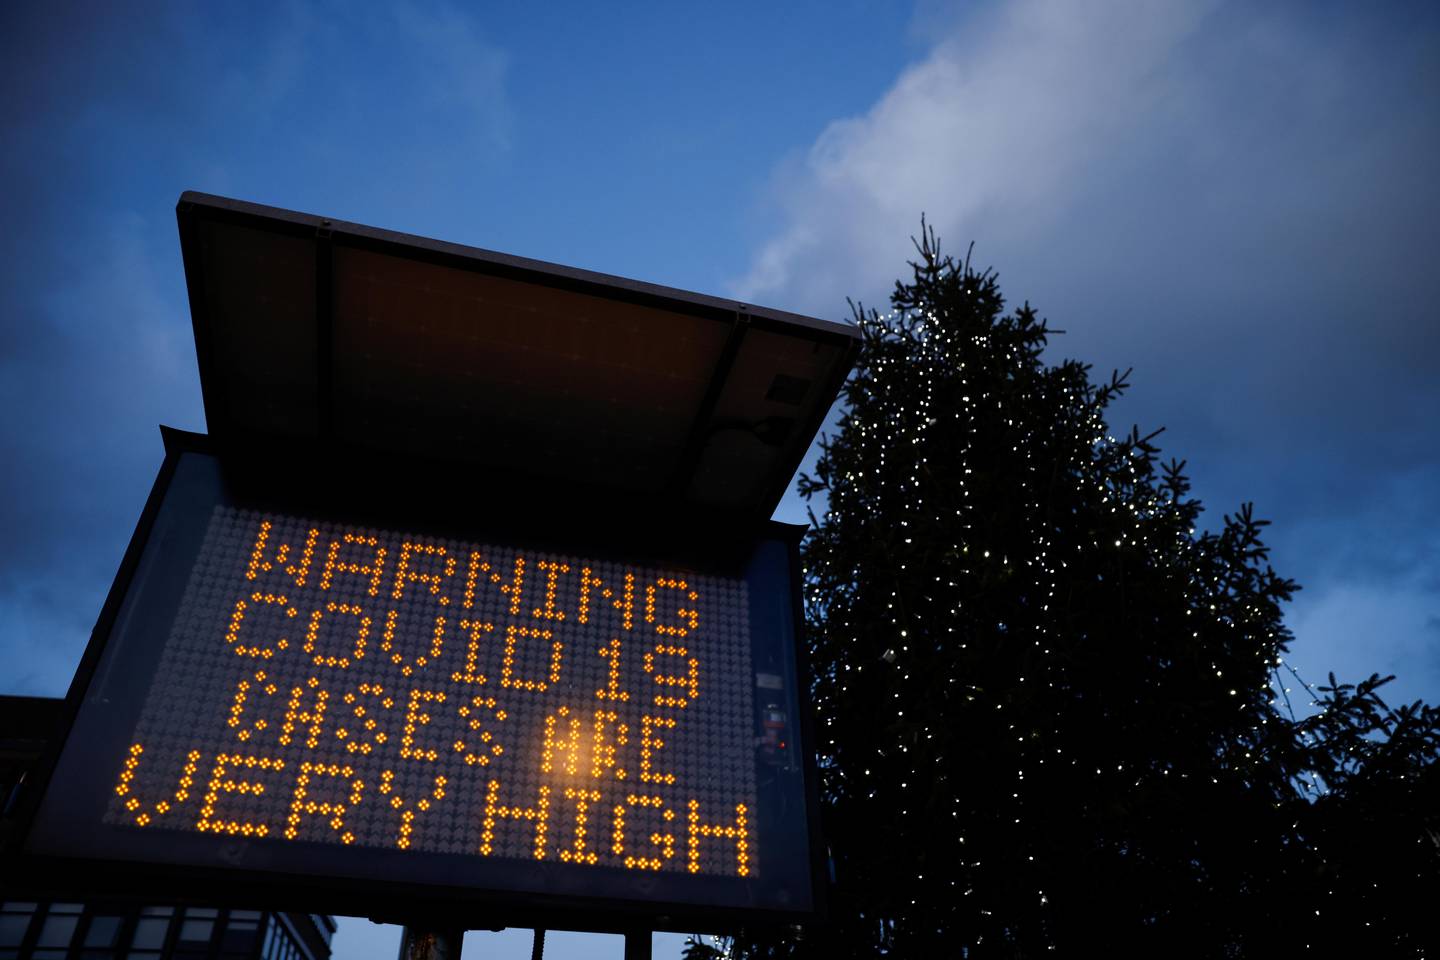 An electronic sign displays information as the British government imposes a stricter tiered set of restrictions amid the coronavirus disease (COVID-19) pandemic, in London, Britain, December 20, 2020. REUTERS/John Sibley